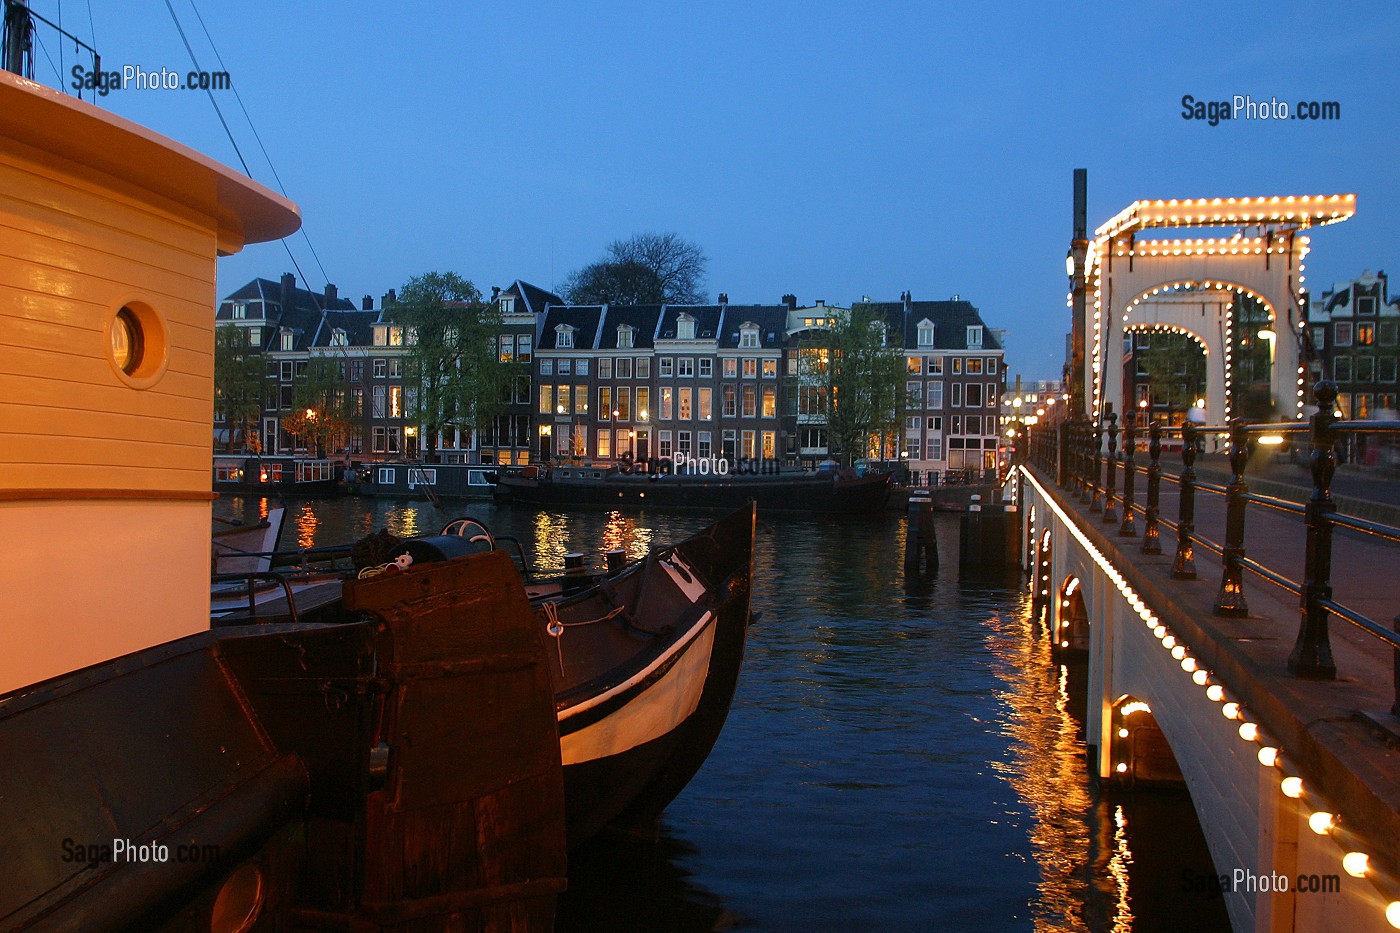 LE PONT MAGERE BRUG, AMSTERDAM, PAYS-BAS 